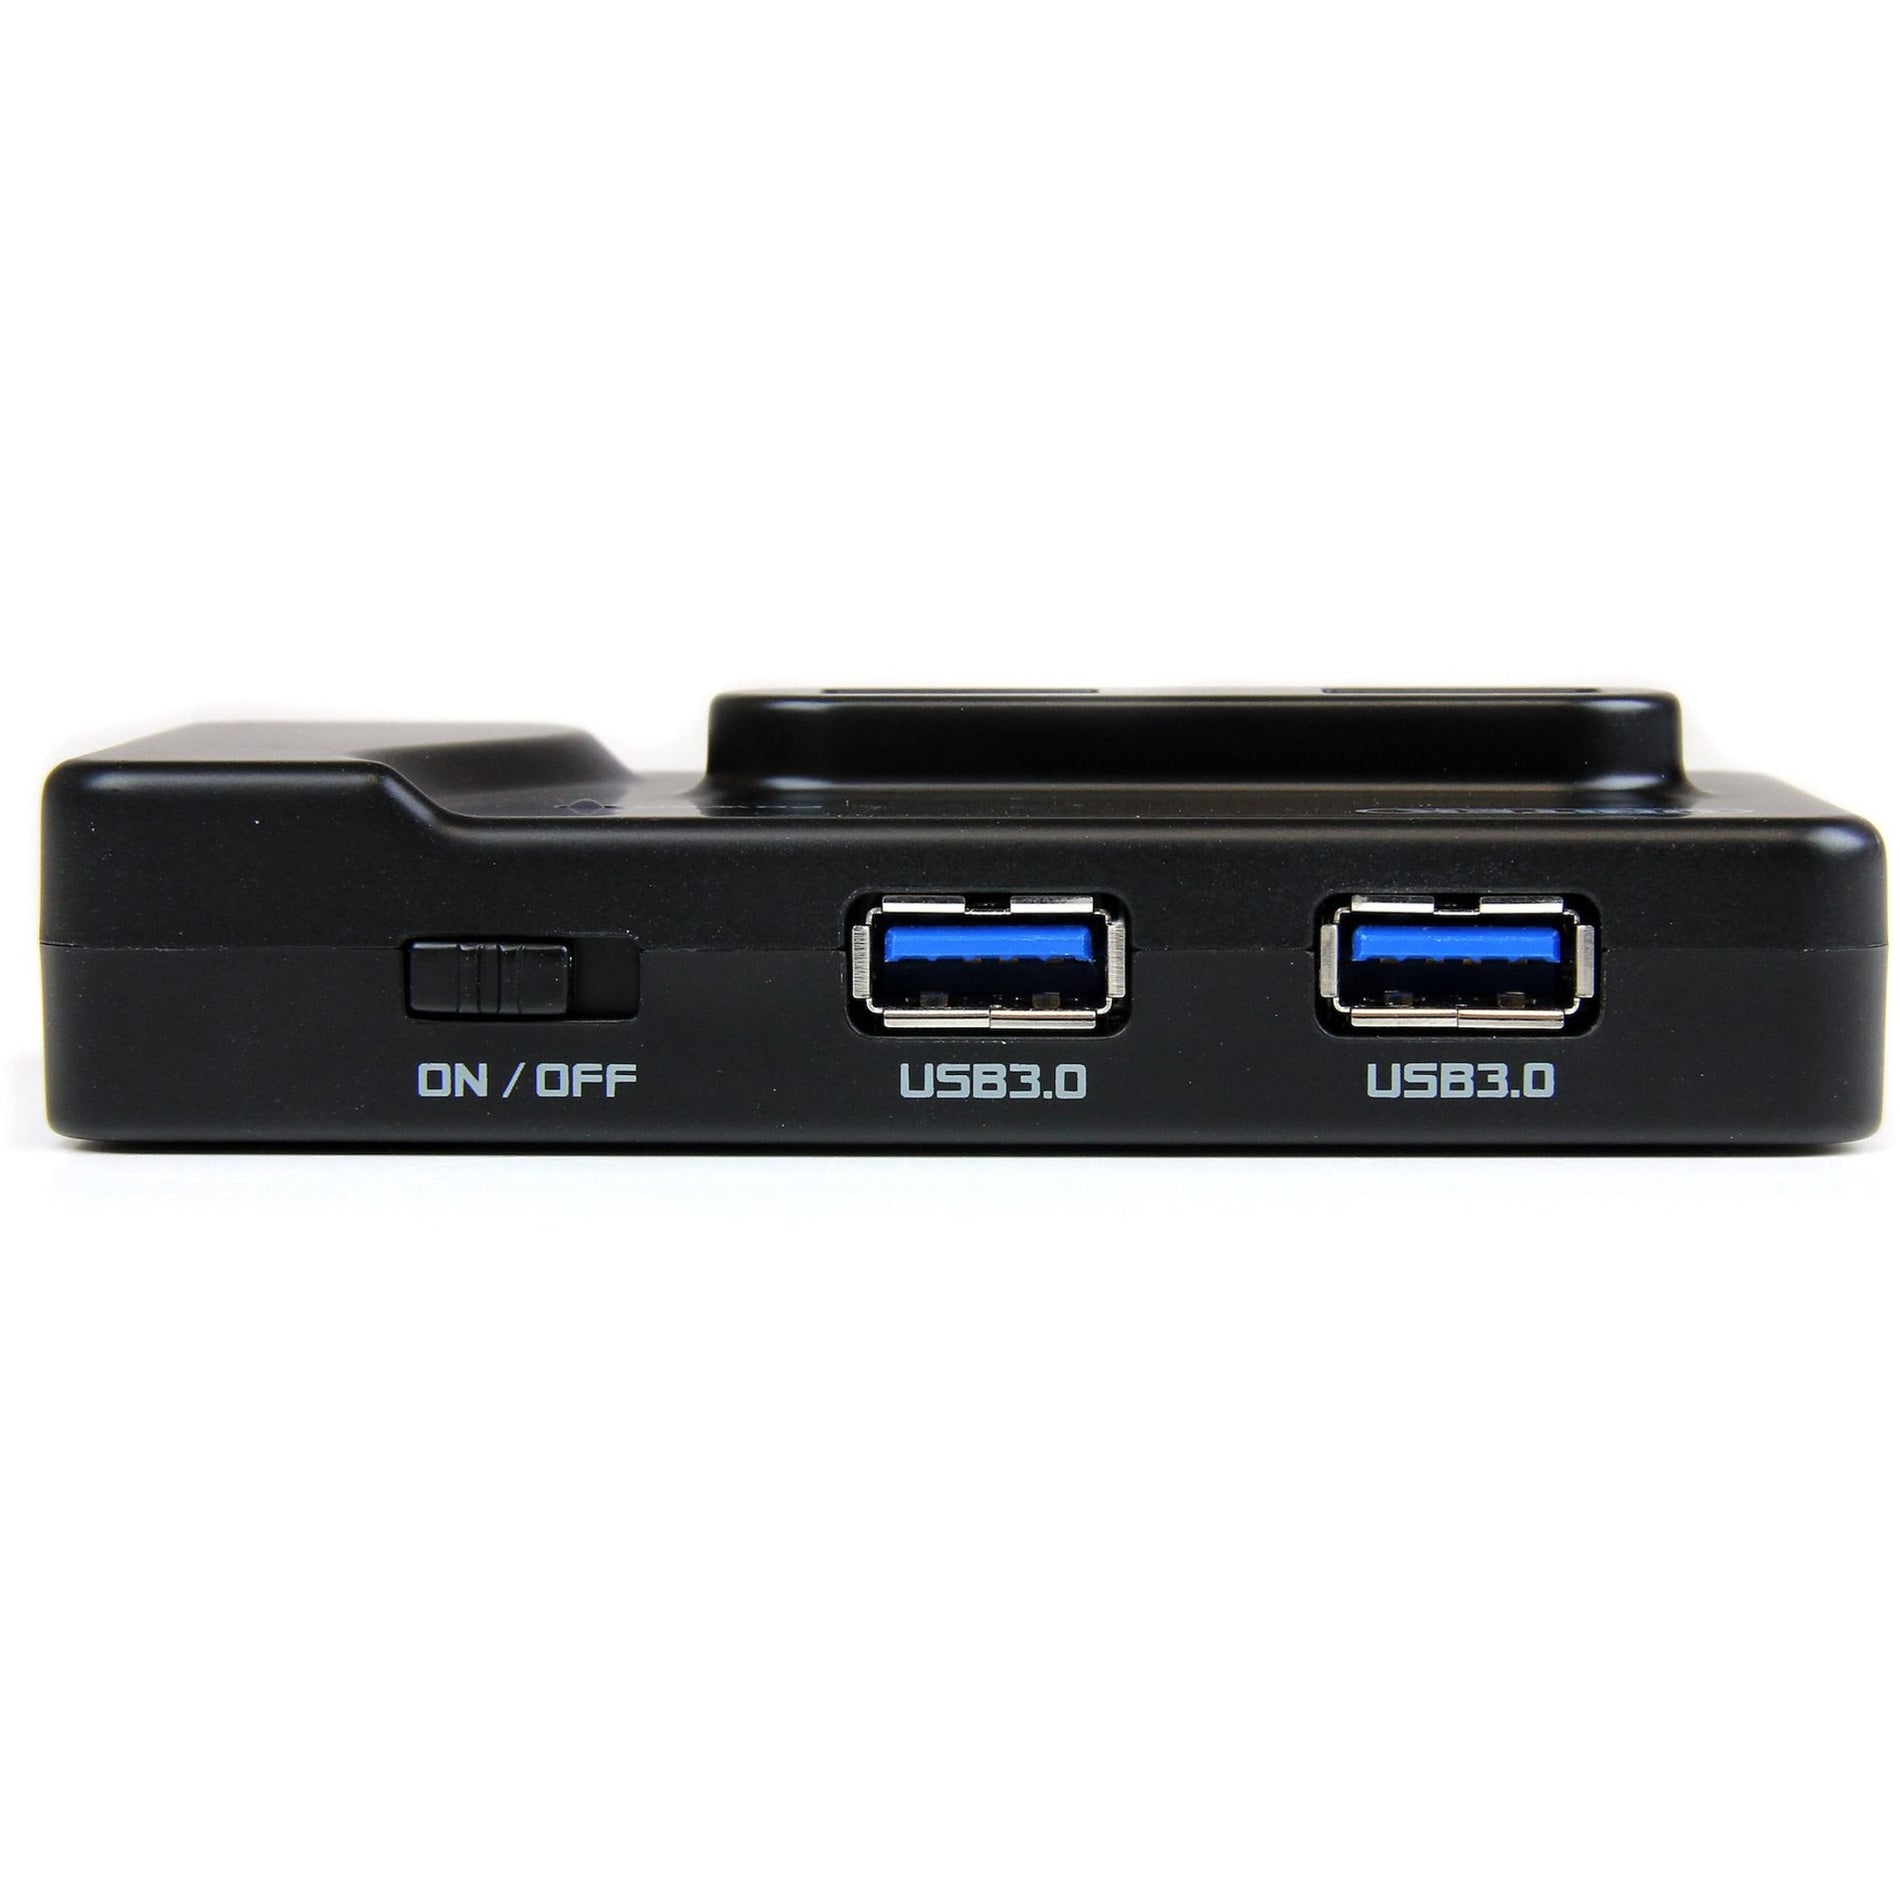 StarTech.com ST7320USBC 6-port USB 3.0/2.0 Combo Hub with Charging Port, Expand Your USB Connectivity